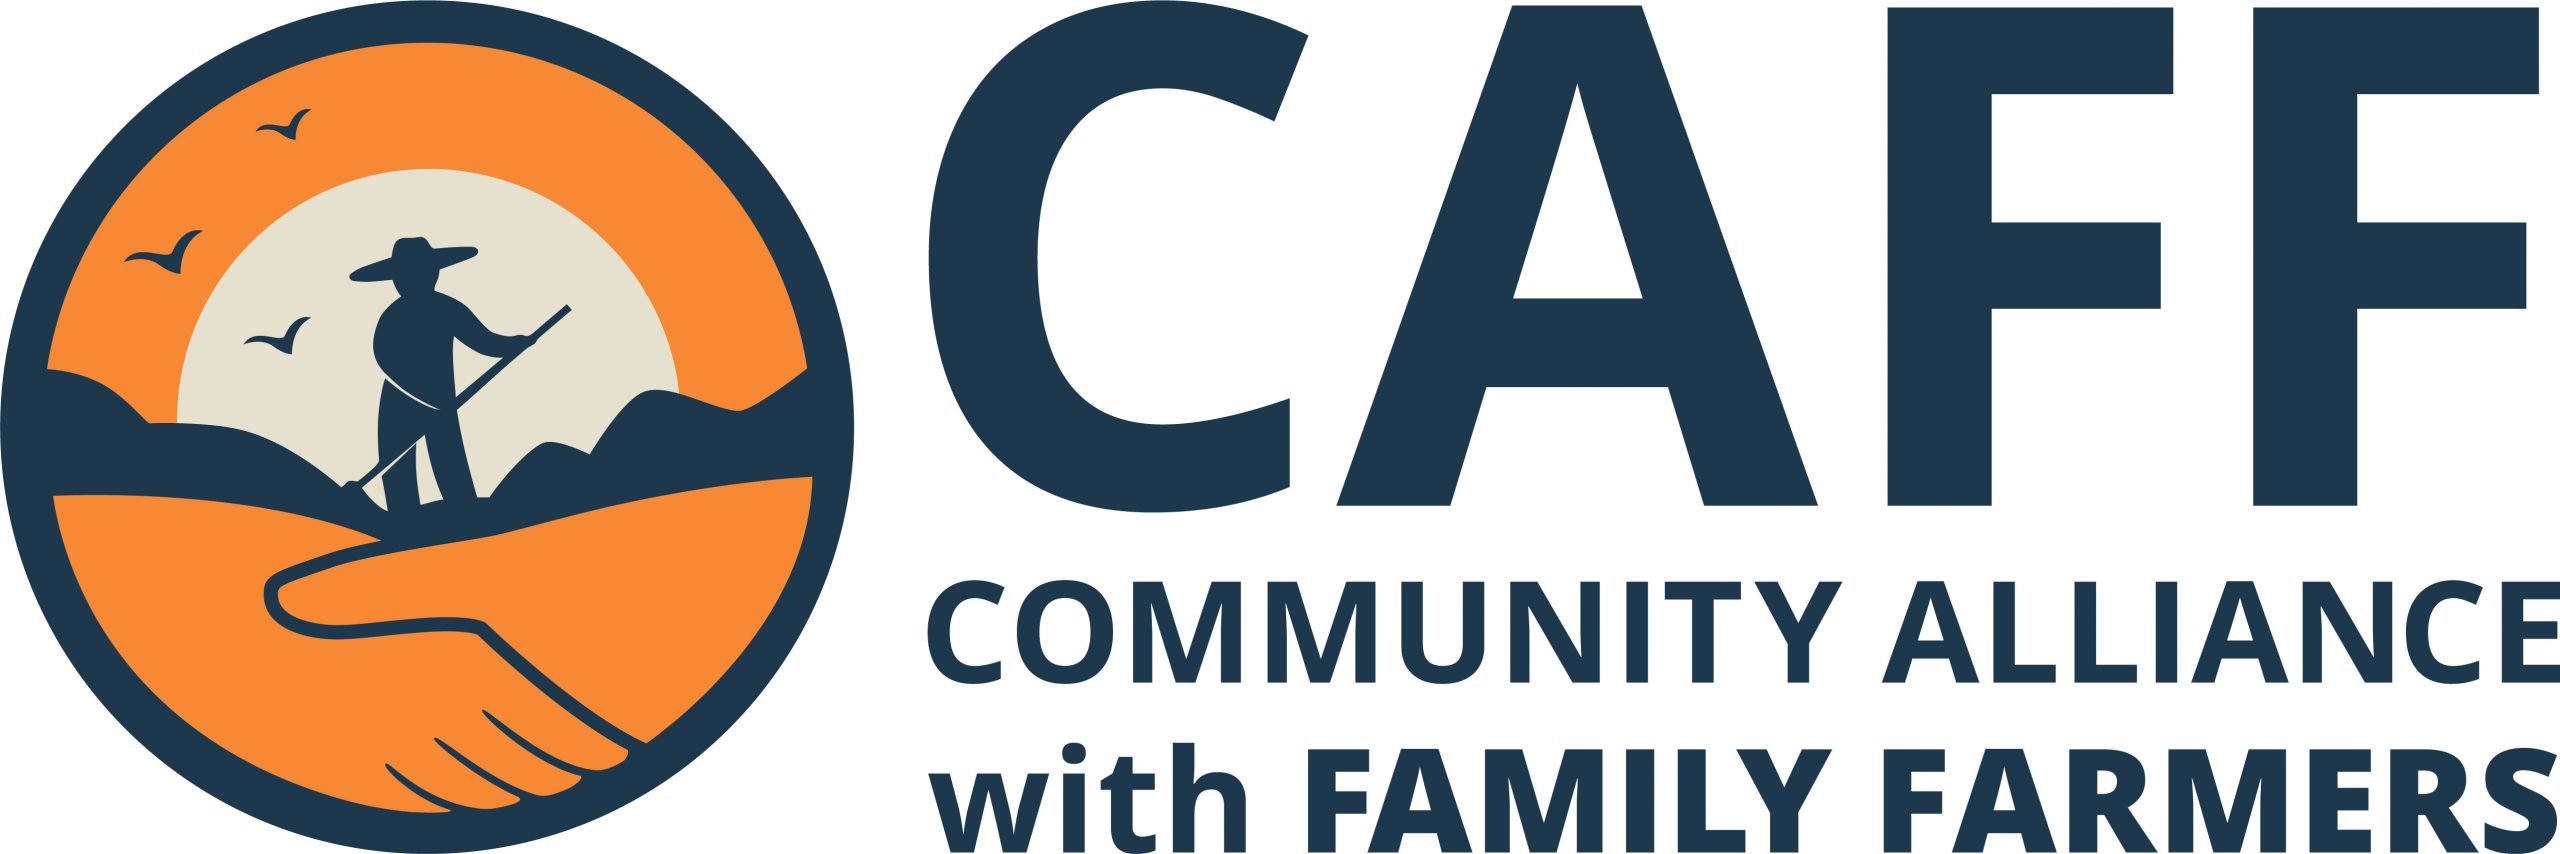 Community Alliance with Family Farmers (CAFF)